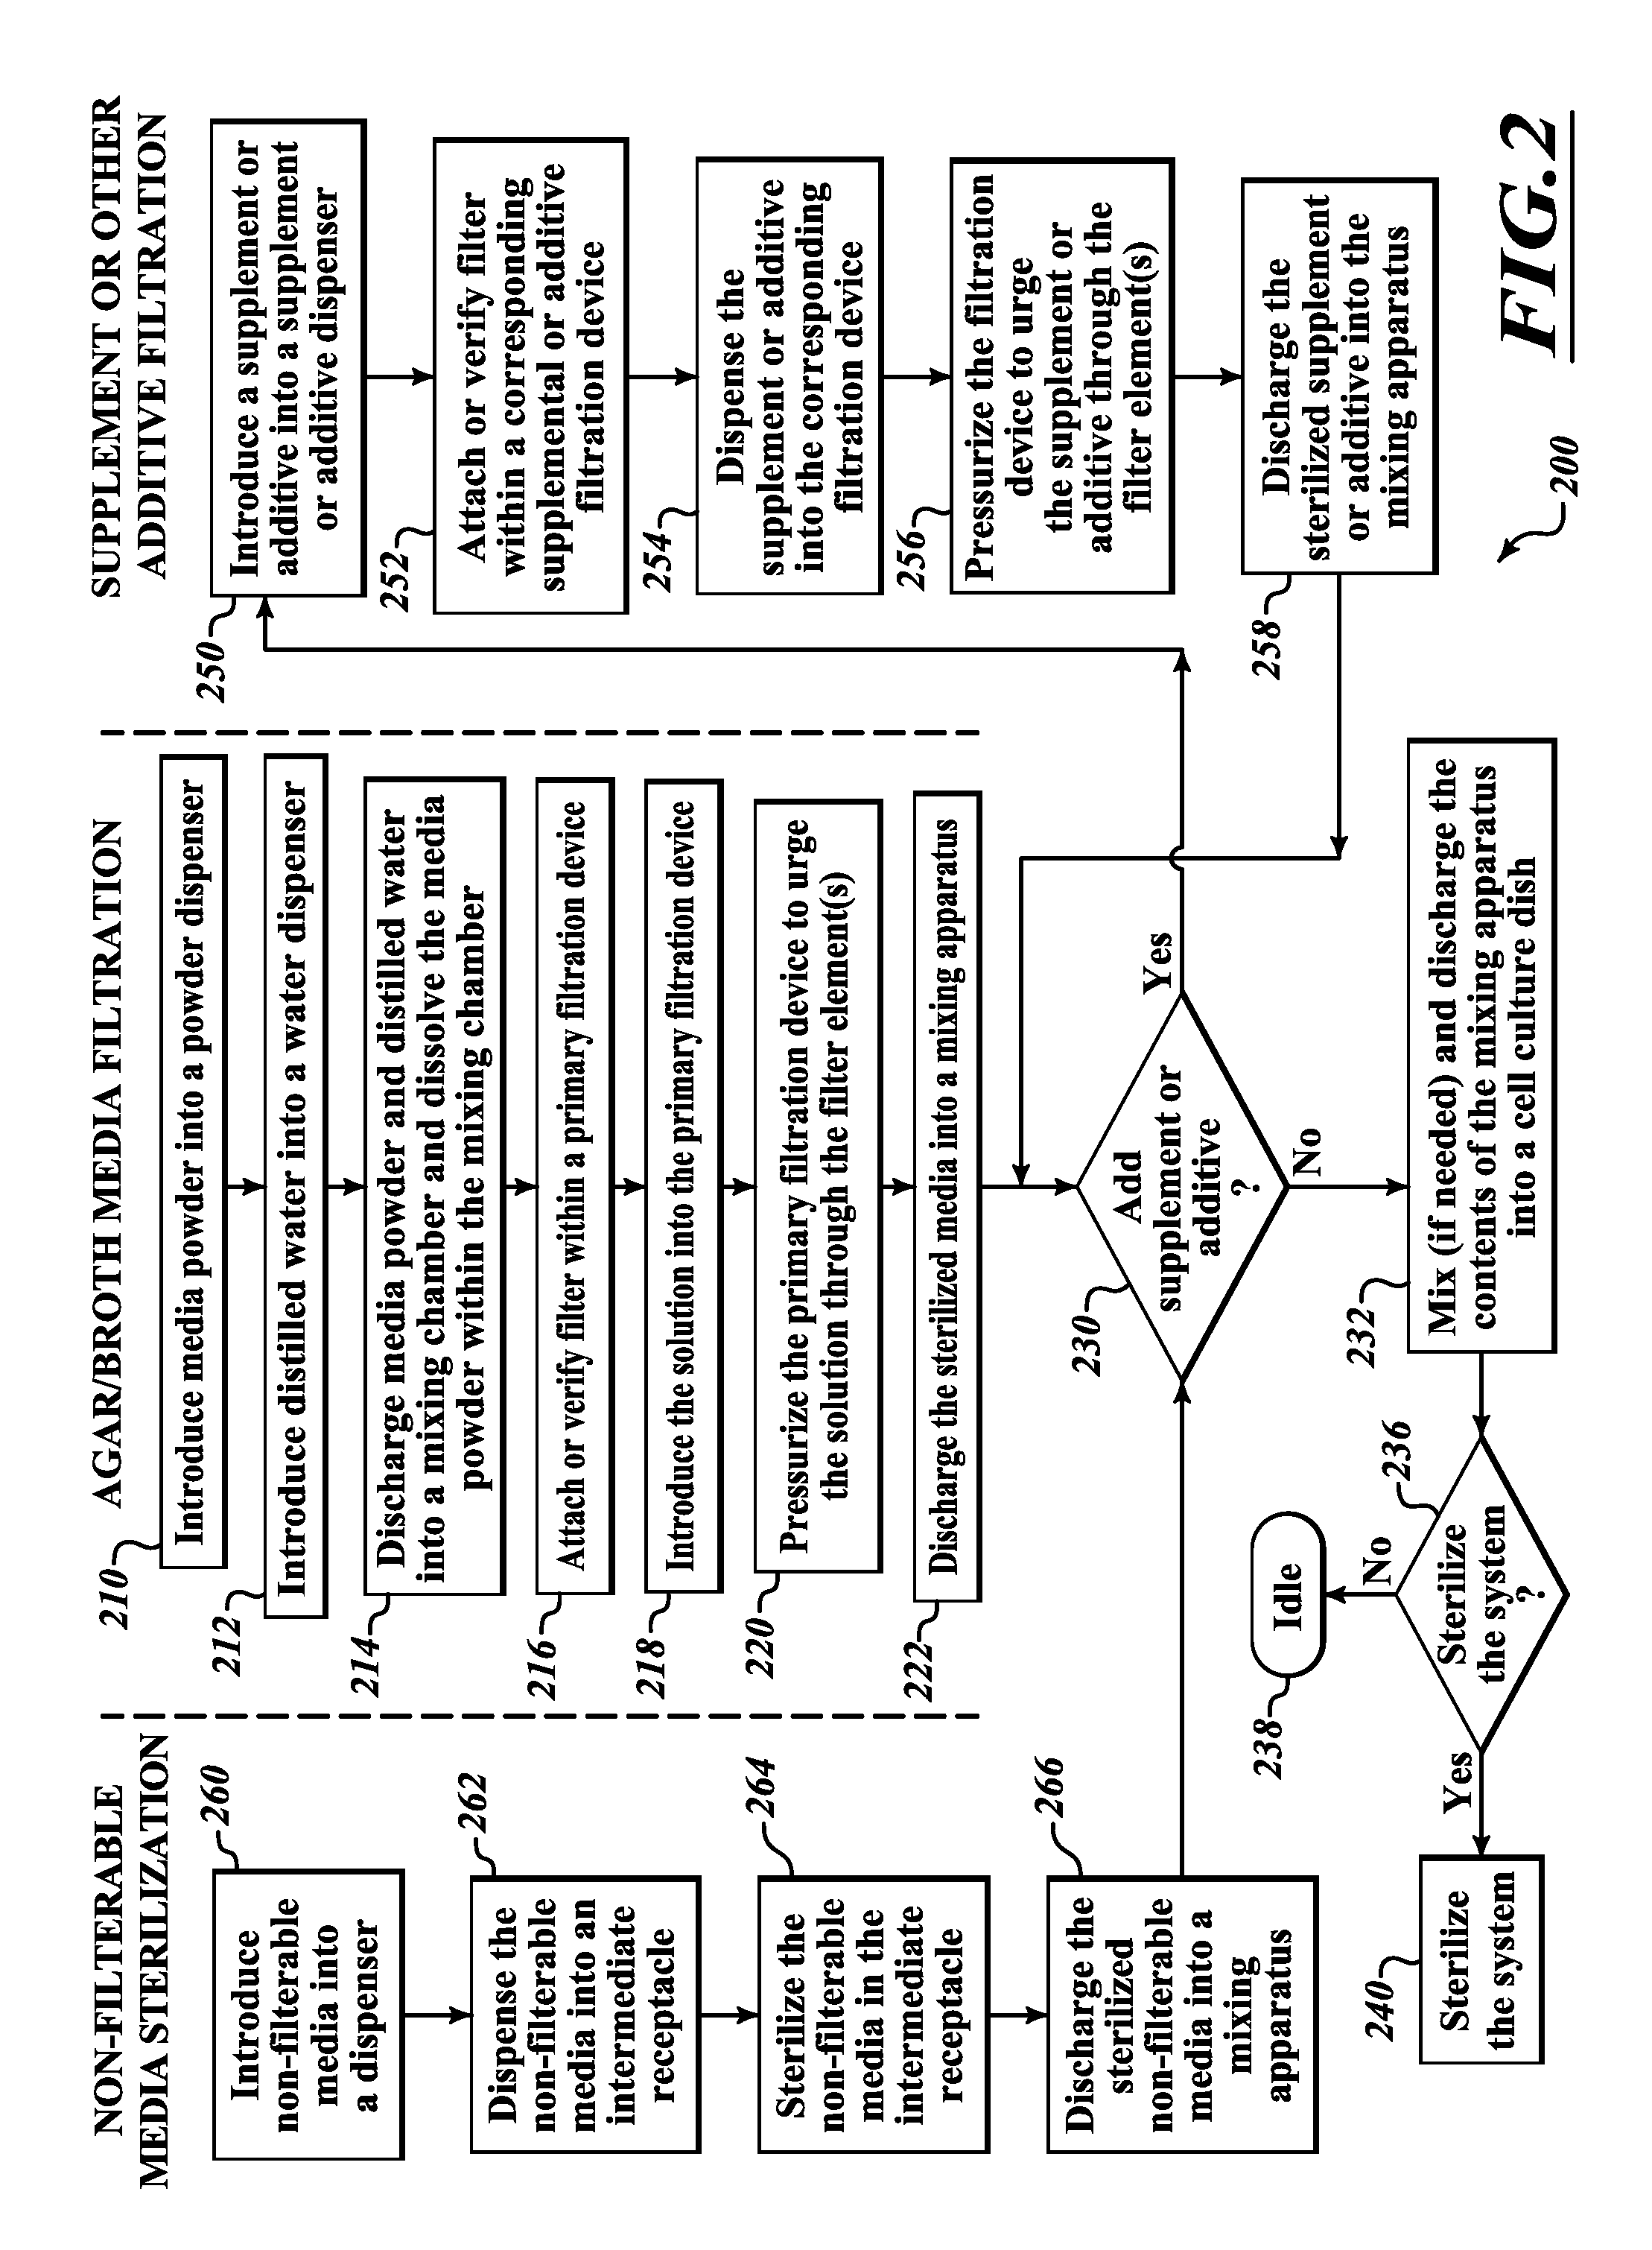 System and method for preparing cell culture dish media